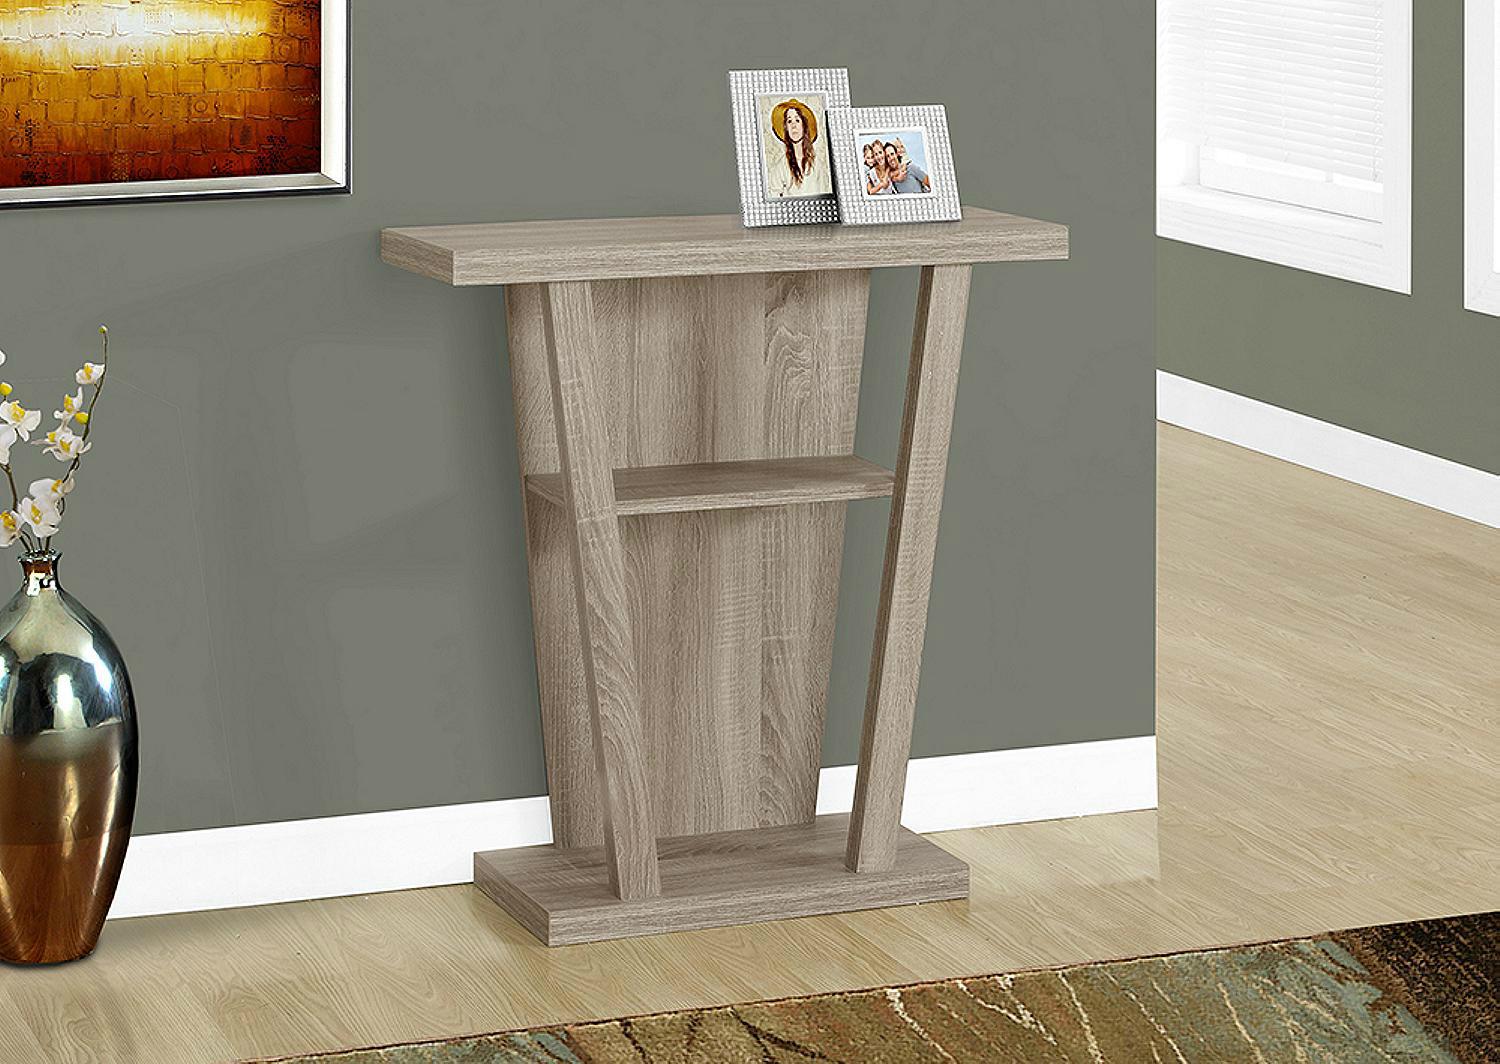 wooden tier hall console entrance accent table mighty living room cabinets wood block coffee inch sofa kohls dining chairs white bedroom nightstand behind couch small metal